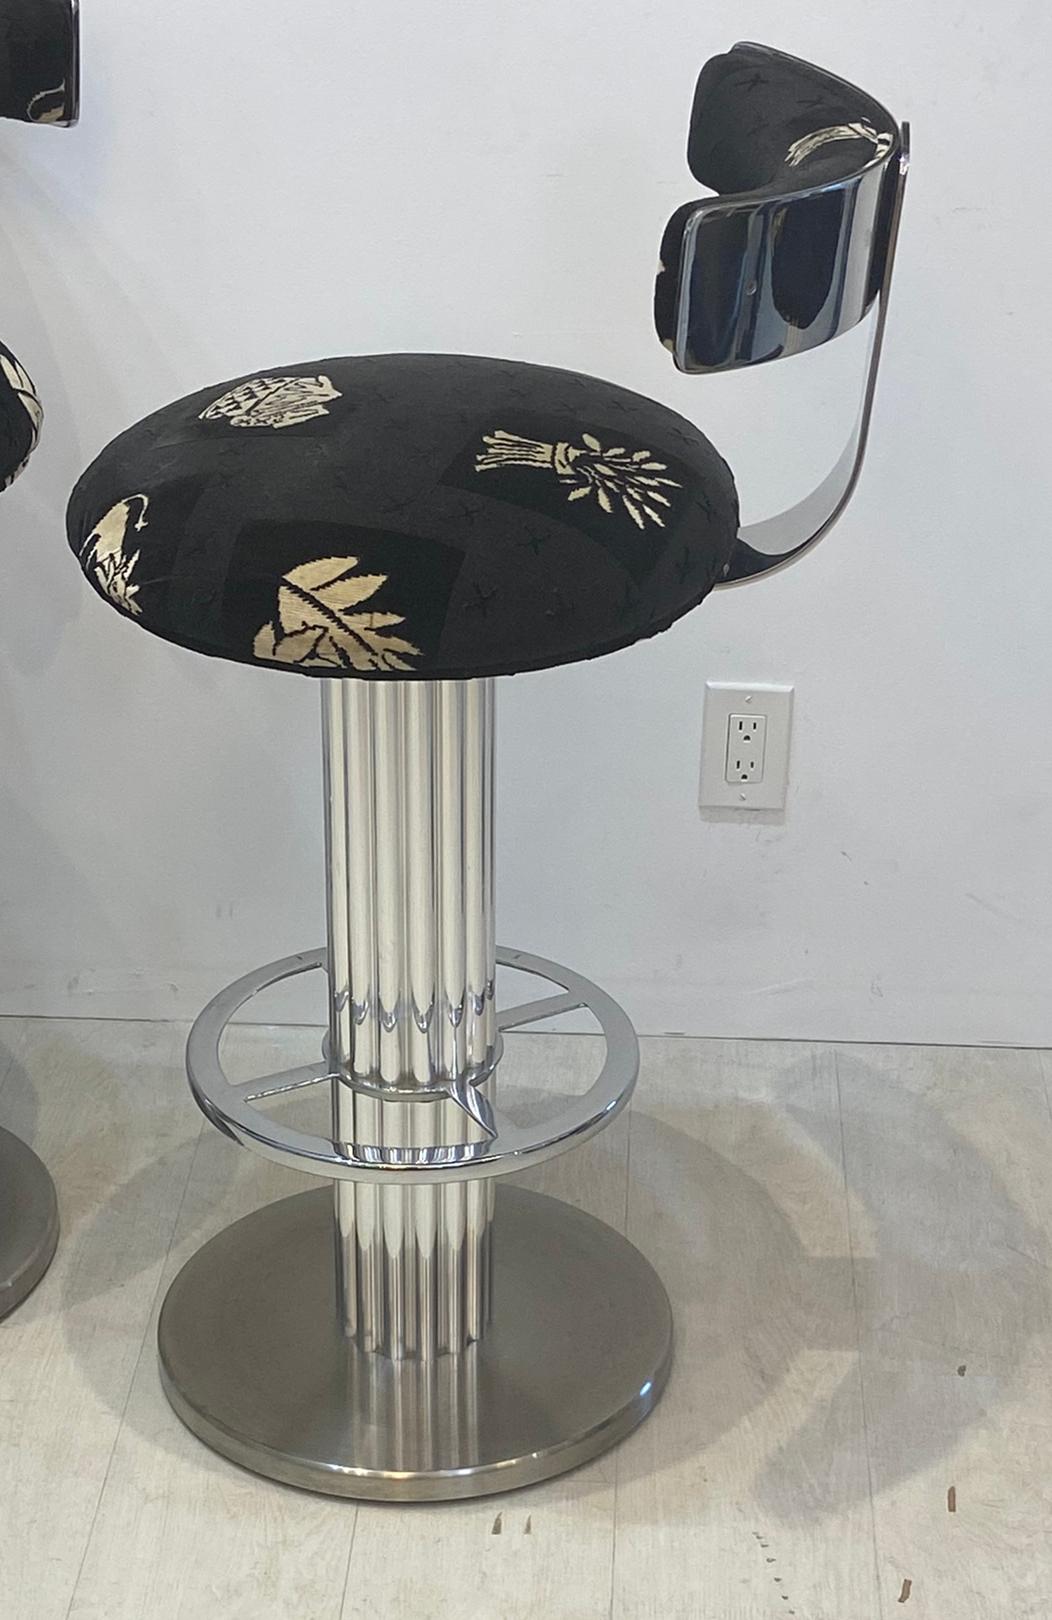 Set of four Design for Leisure bar stools. In very good condition. Upholstered with black fabric with whimsical figures and design. Fabric in very good usable condition. From a well cared for estate.